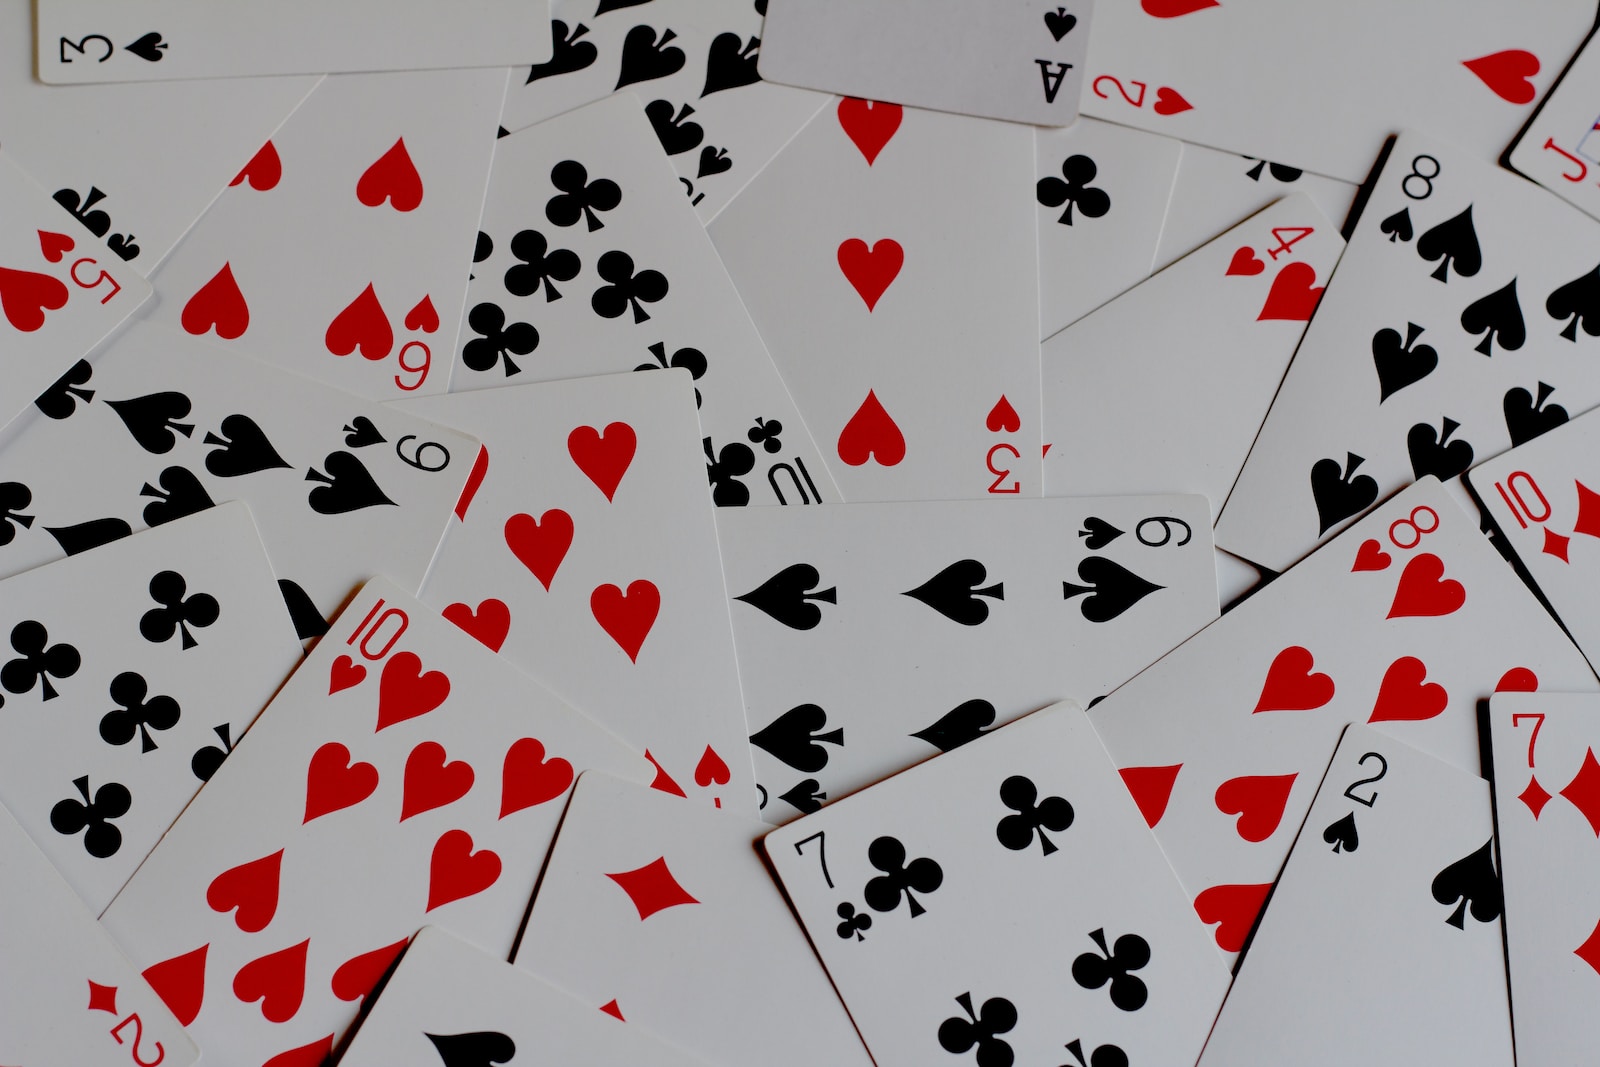 a pile of playing cards with hearts and spades